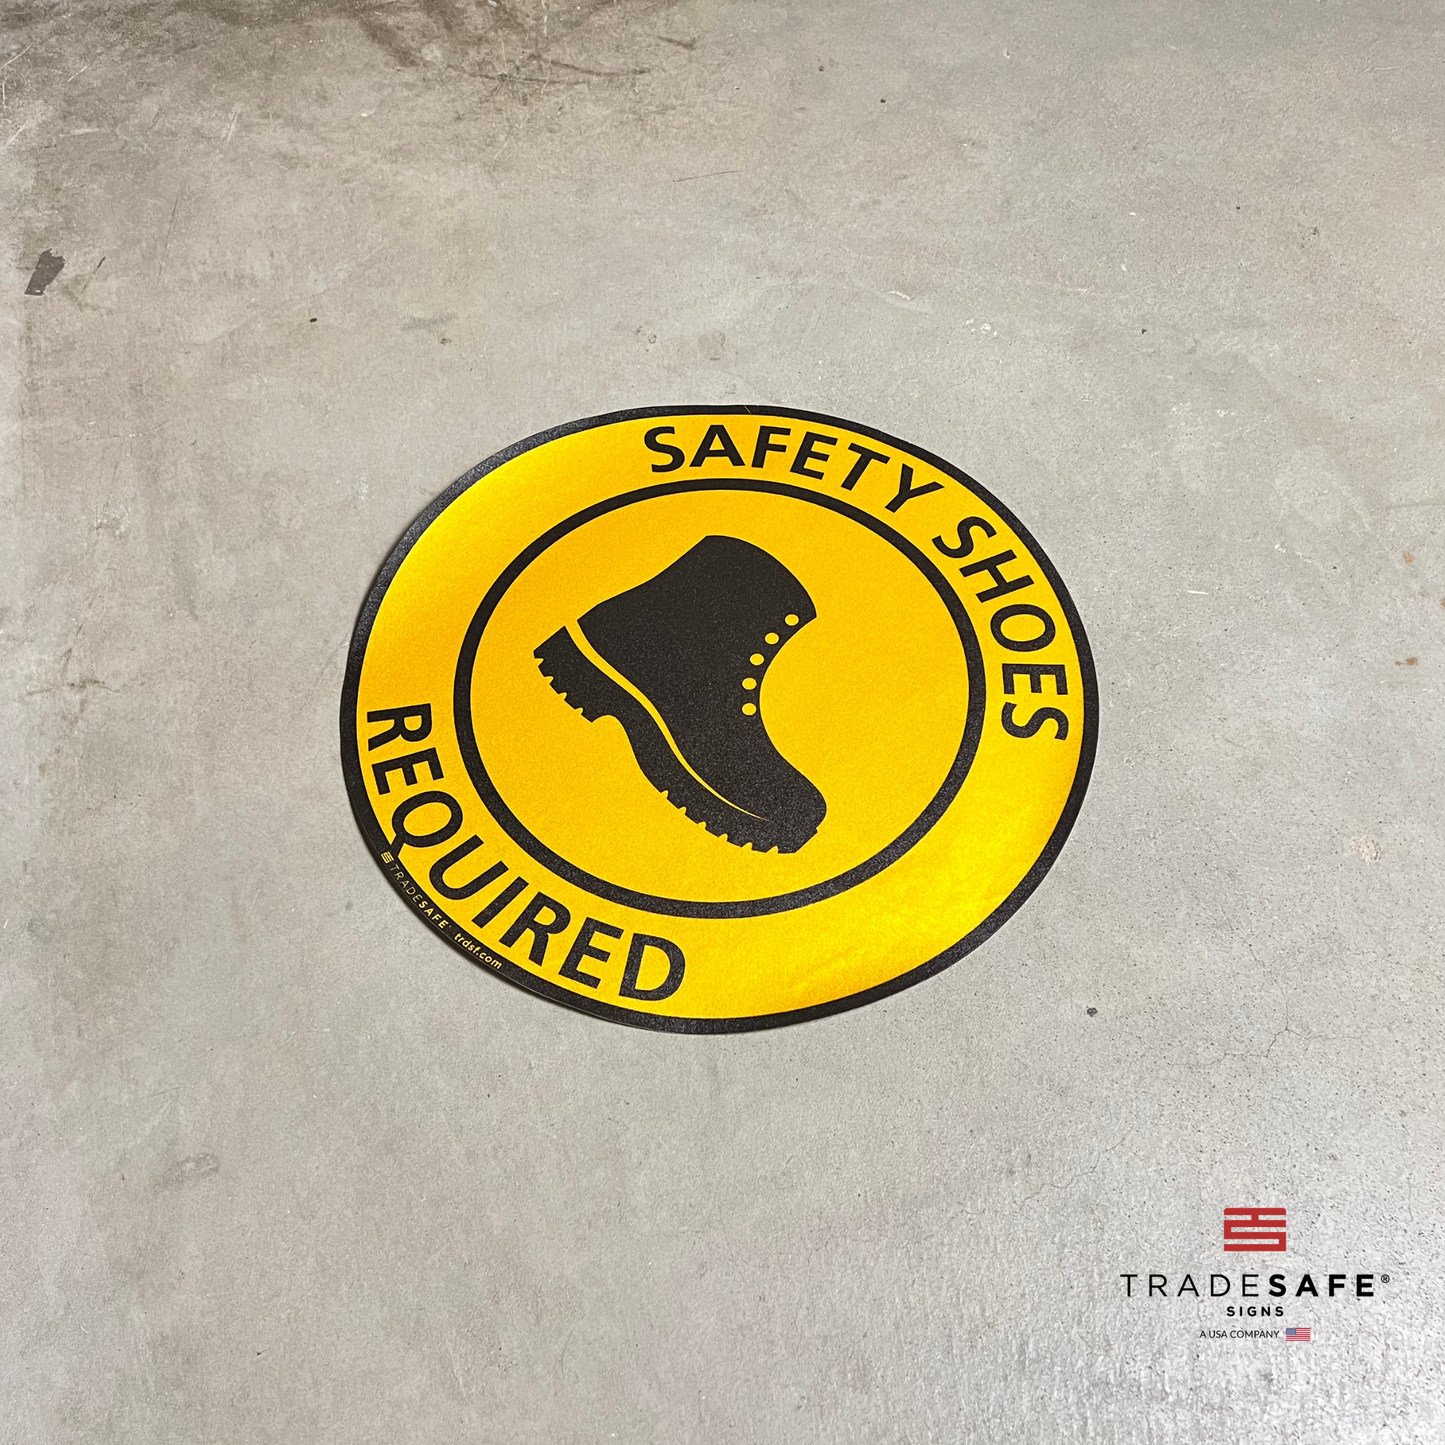 "safety shoes required" sign vinyl sticker on floor